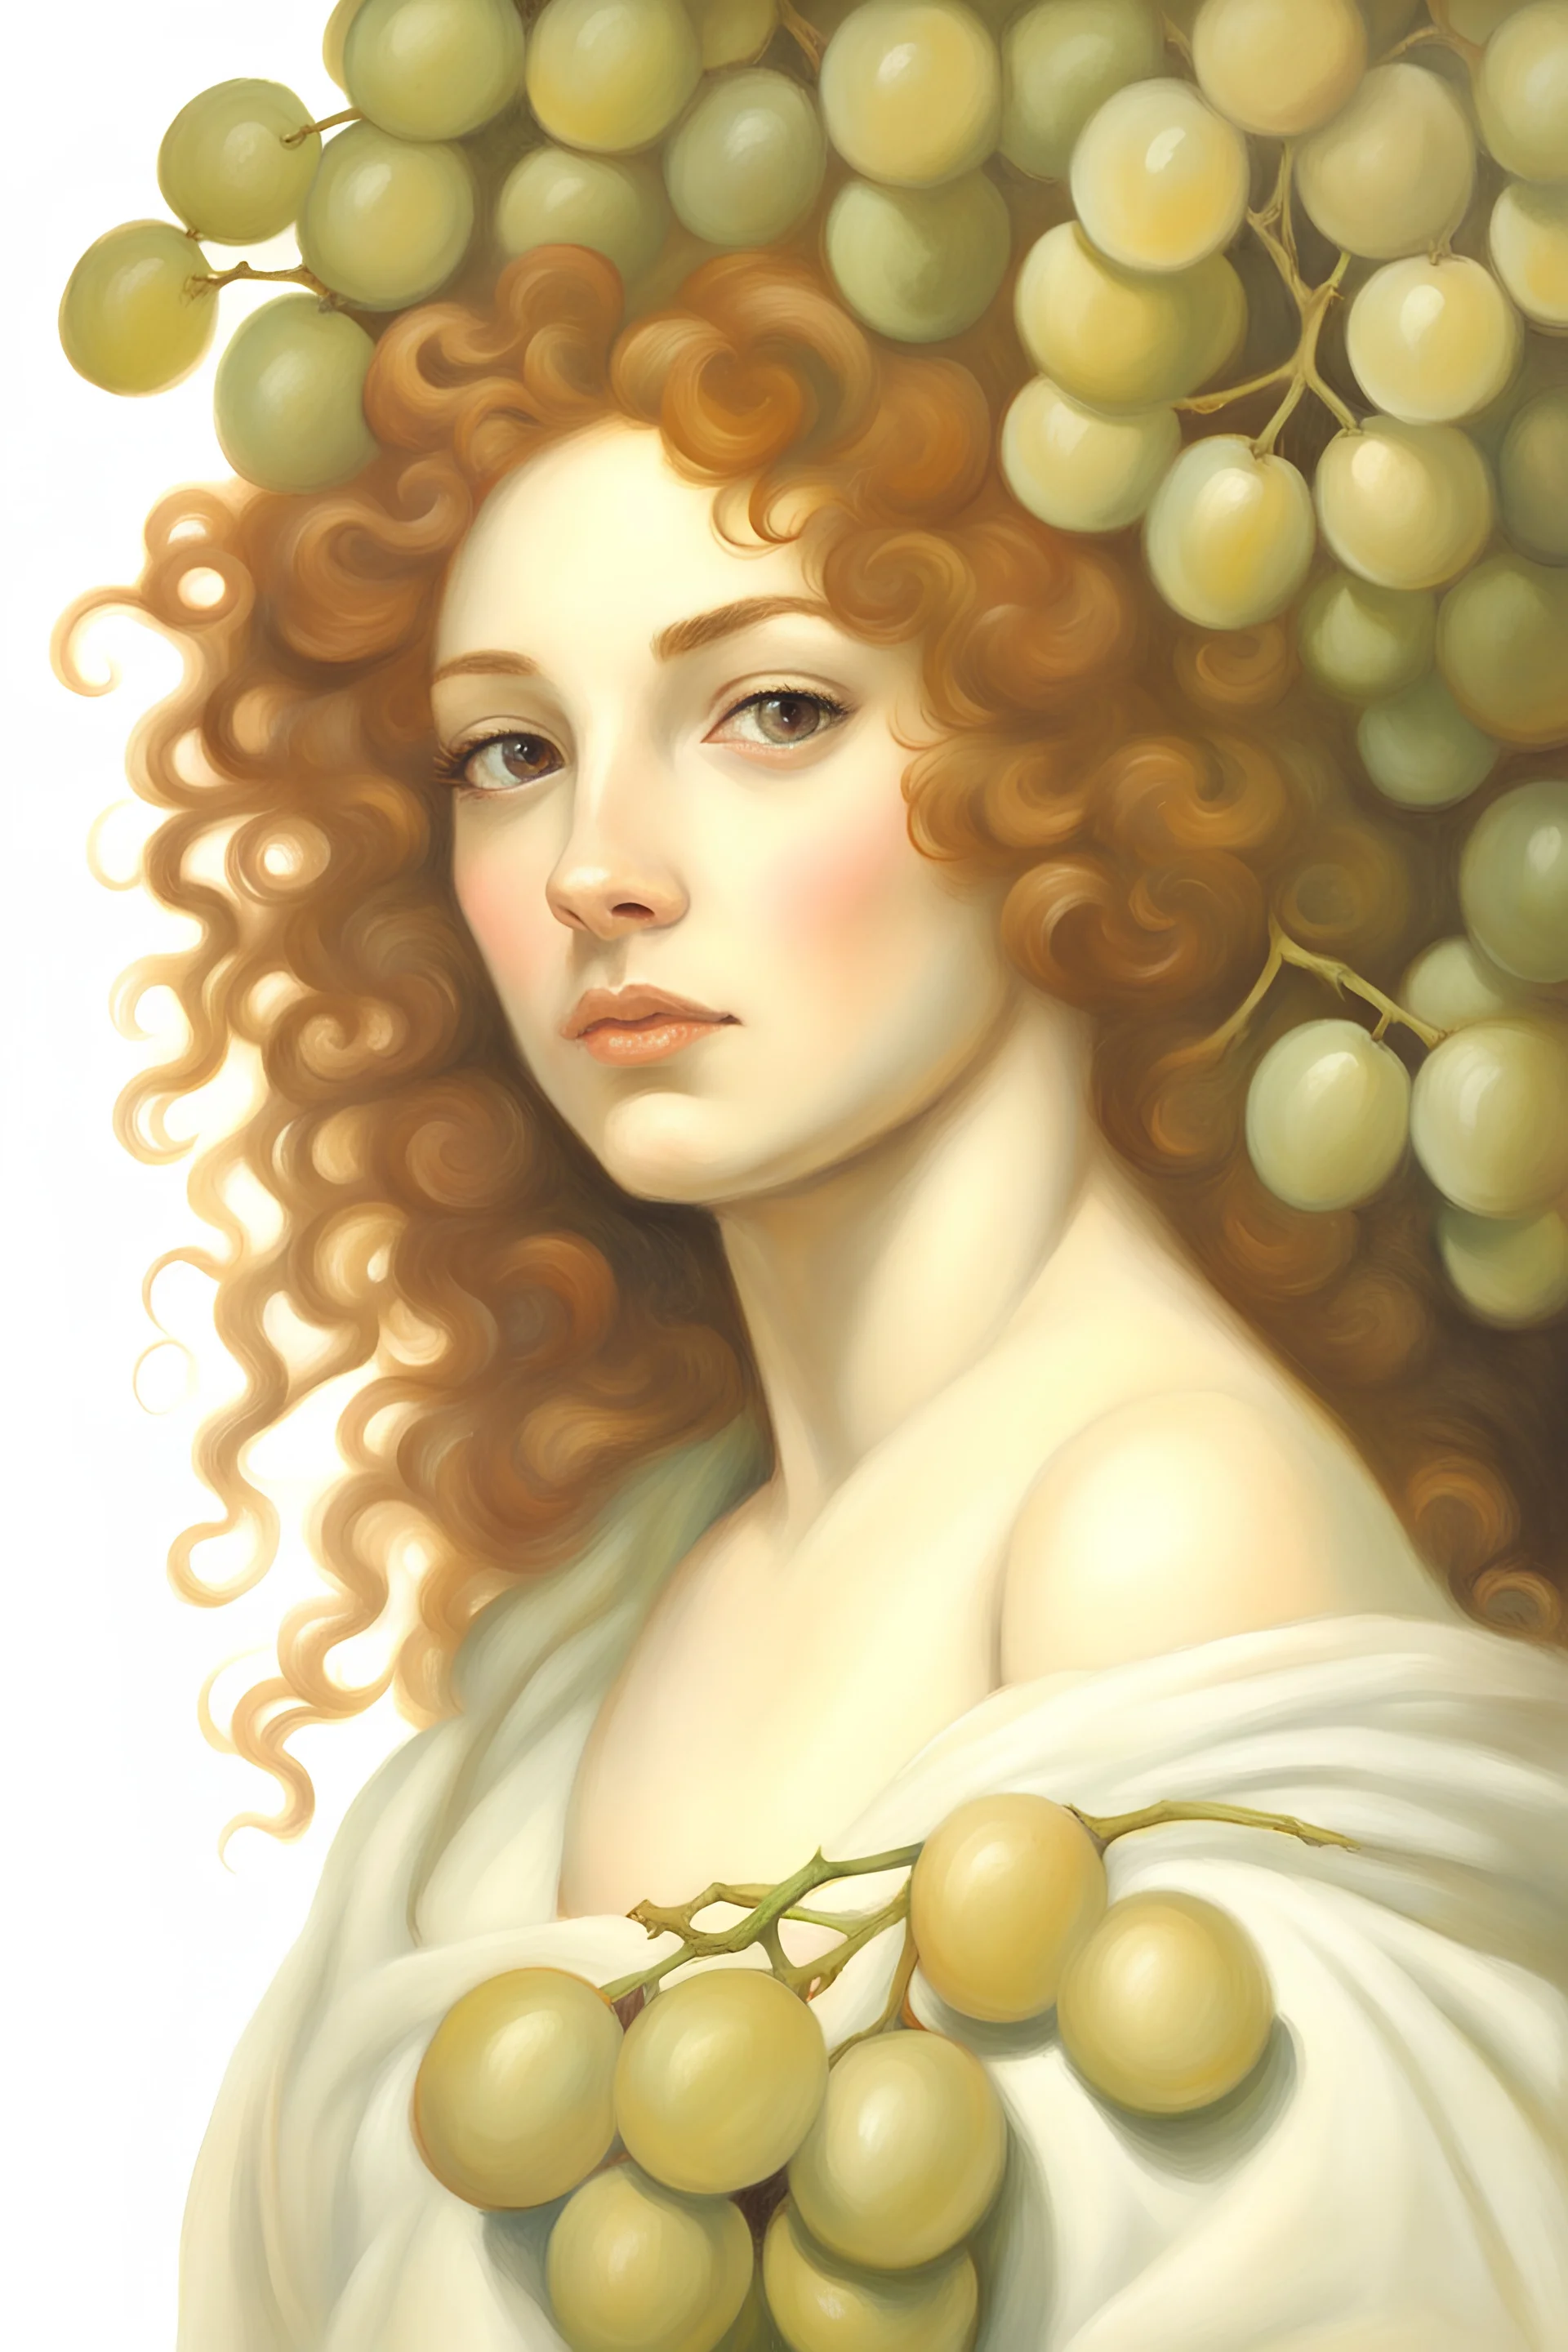 Romantic oil painting, the face of a young woman with auburn curly hair against a dark background. The left half of her face is behind a bunch of ripe greenish grapes, while on the right, there is an ivory-white Manila mantle adorned with knives and roses.